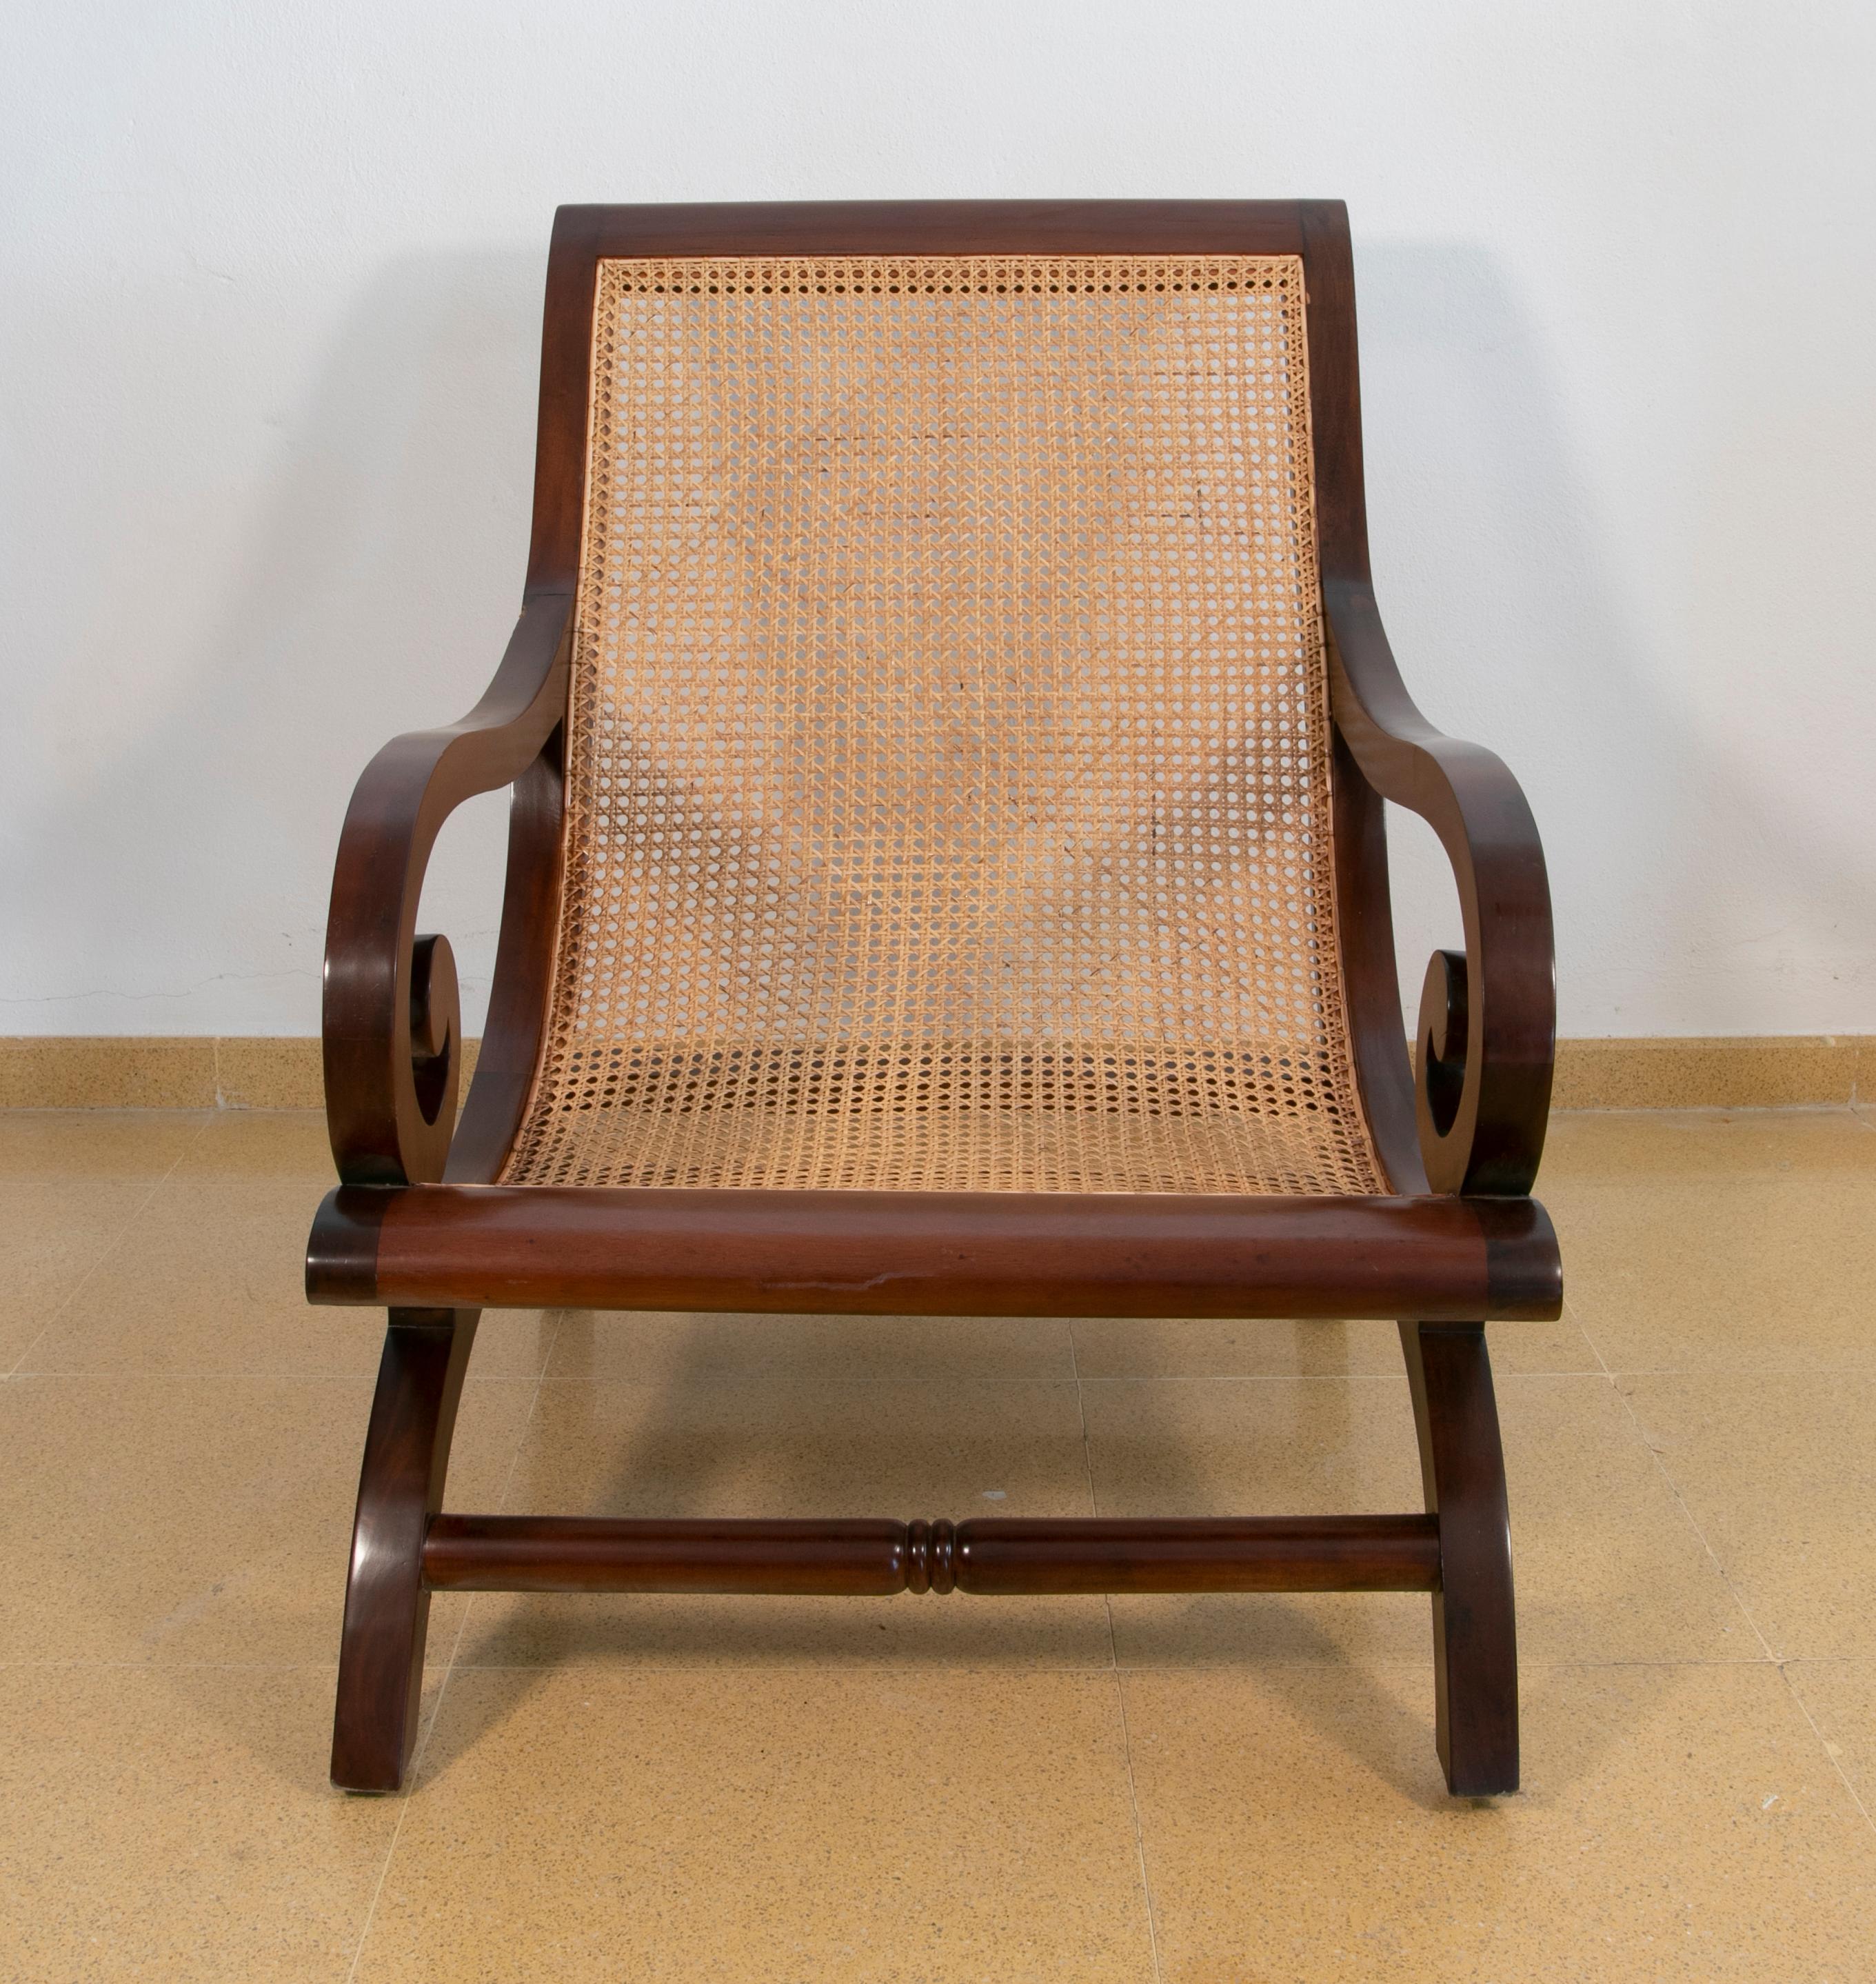 Pair of mahogany wooden armchairs with wicker grid seats.